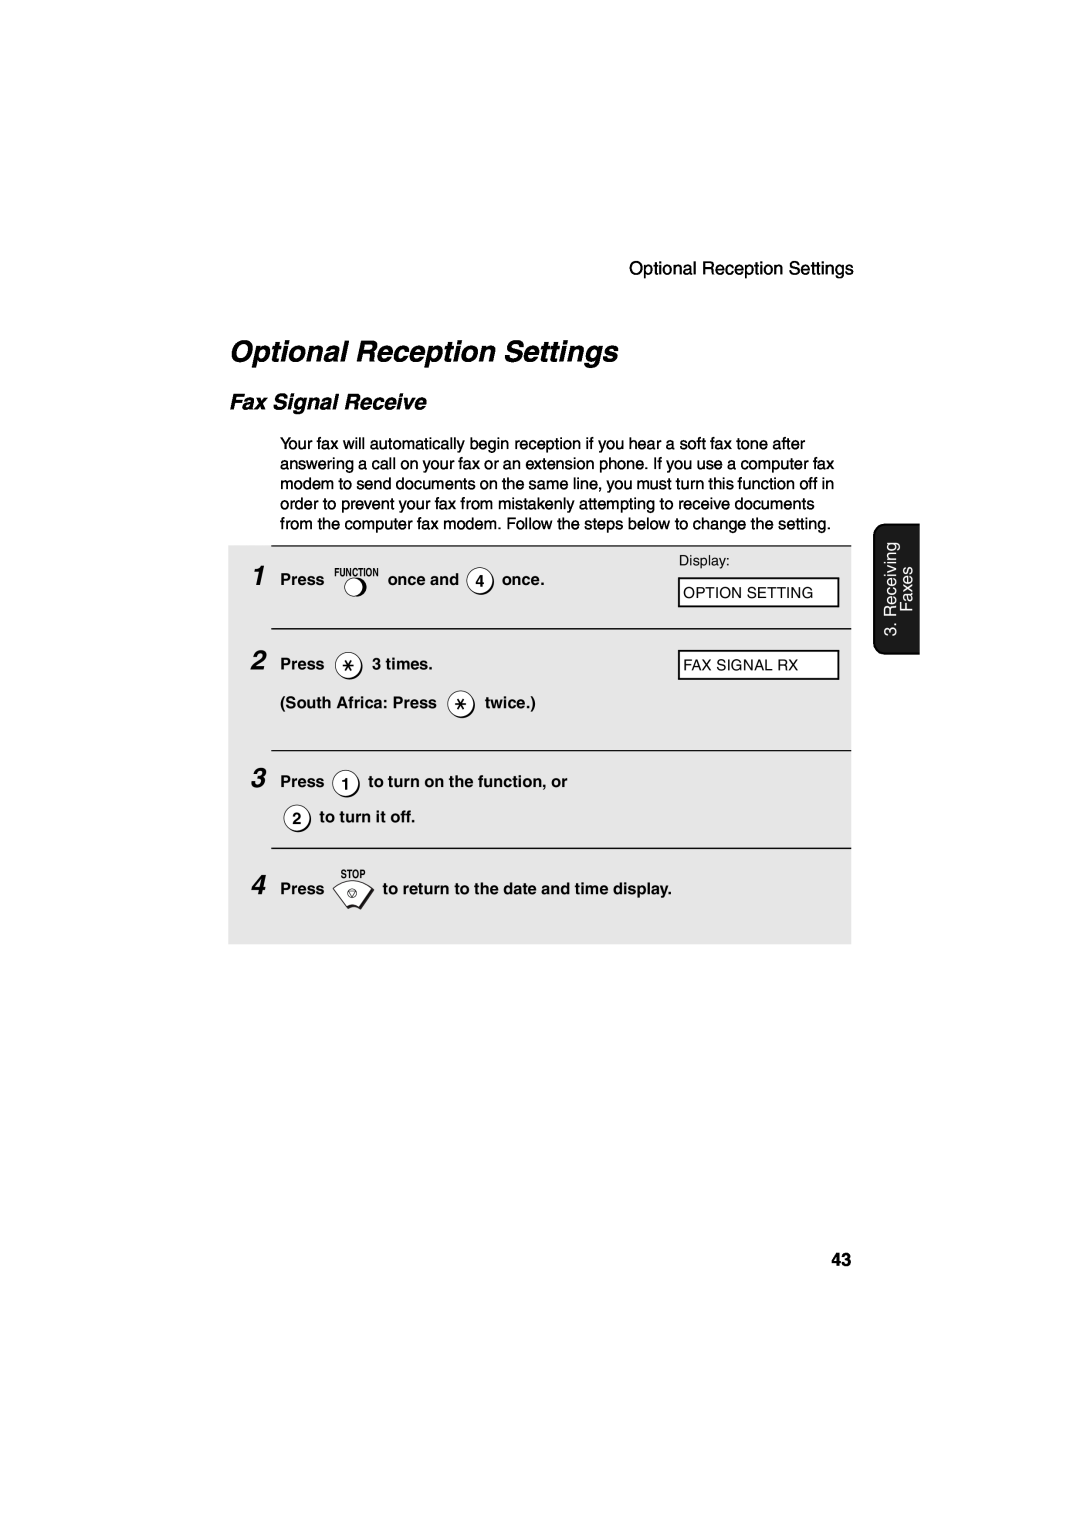 Sharp UX-21 Optional Reception Settings, Fax Signal Receive, Receiving, Faxes, Press FUNCTION once and 4 once, times 